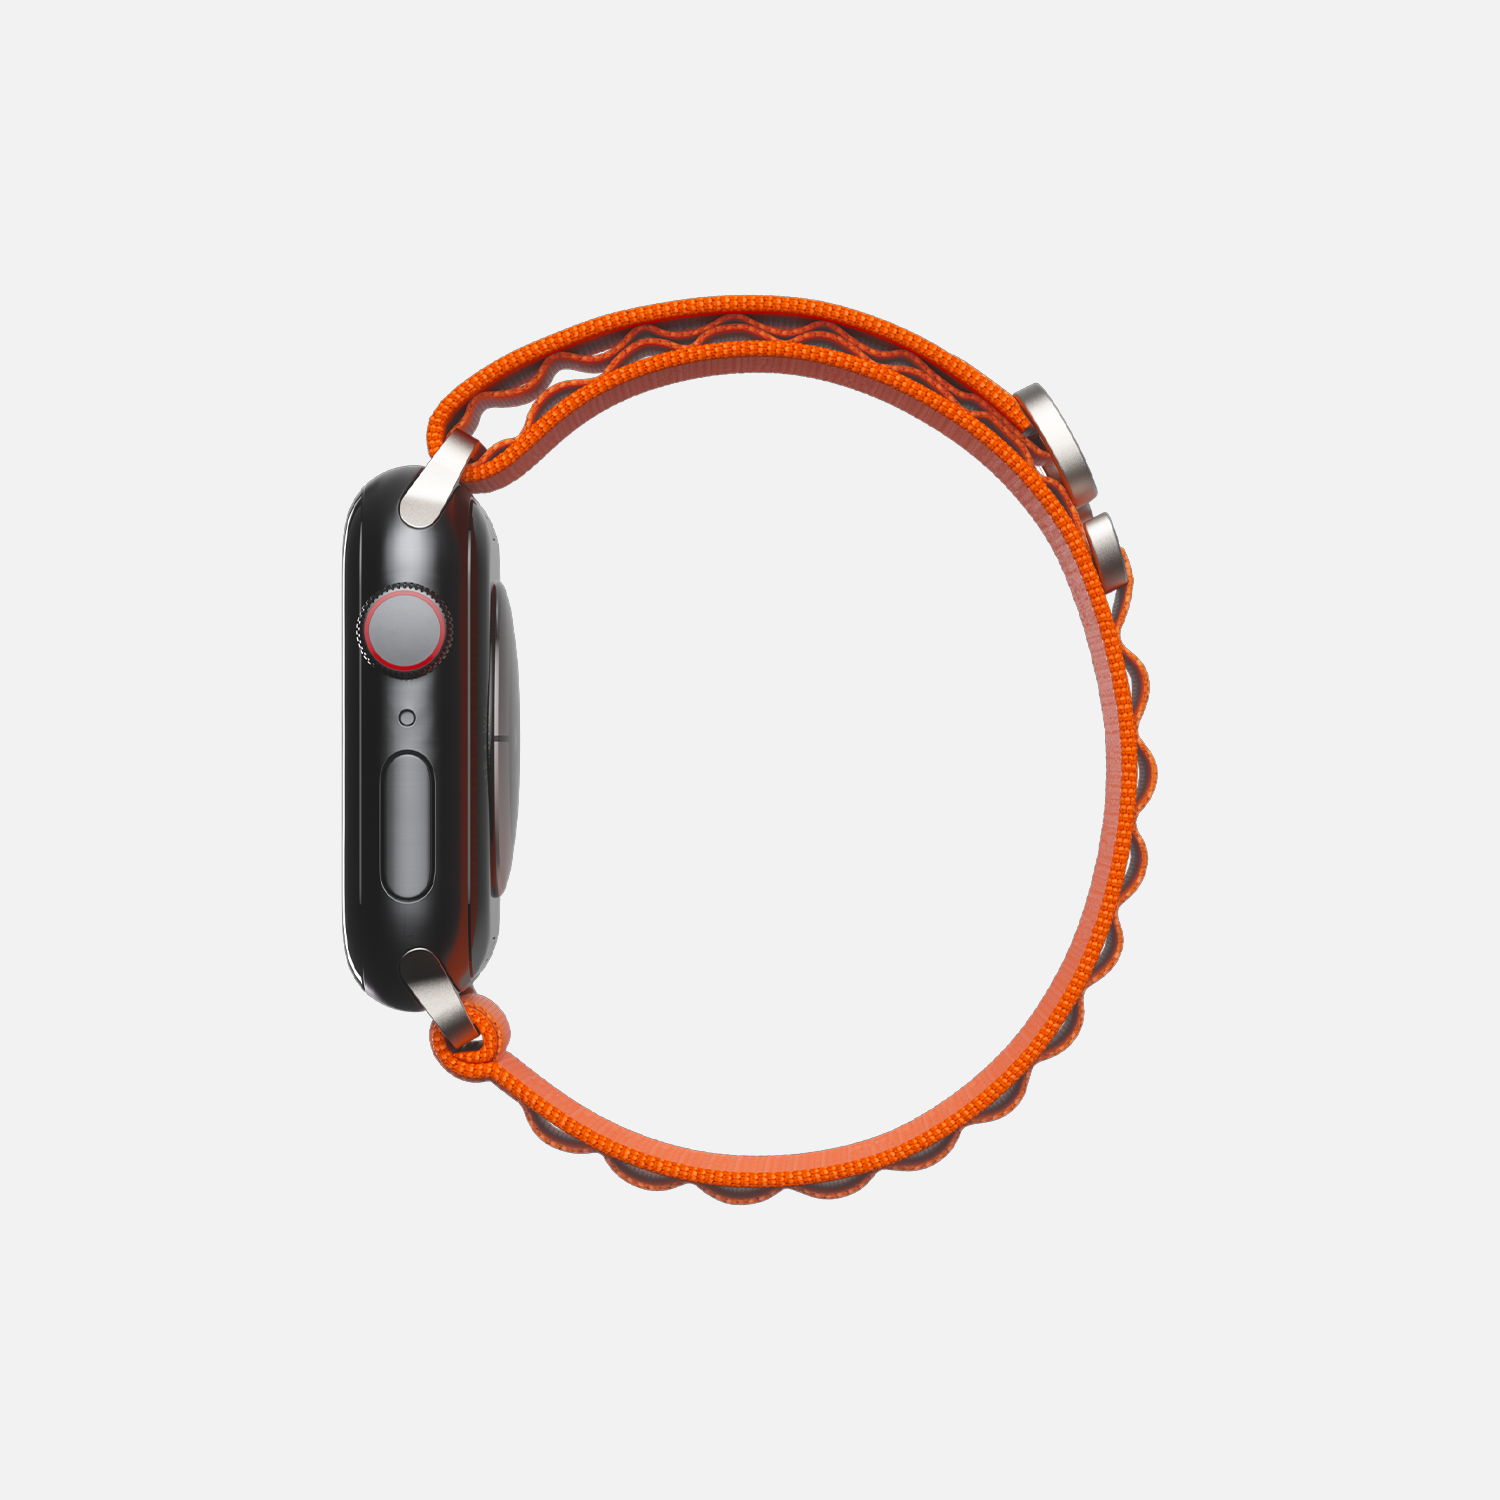 Side view of a smartwatch with orange braided loop isolated on white background.